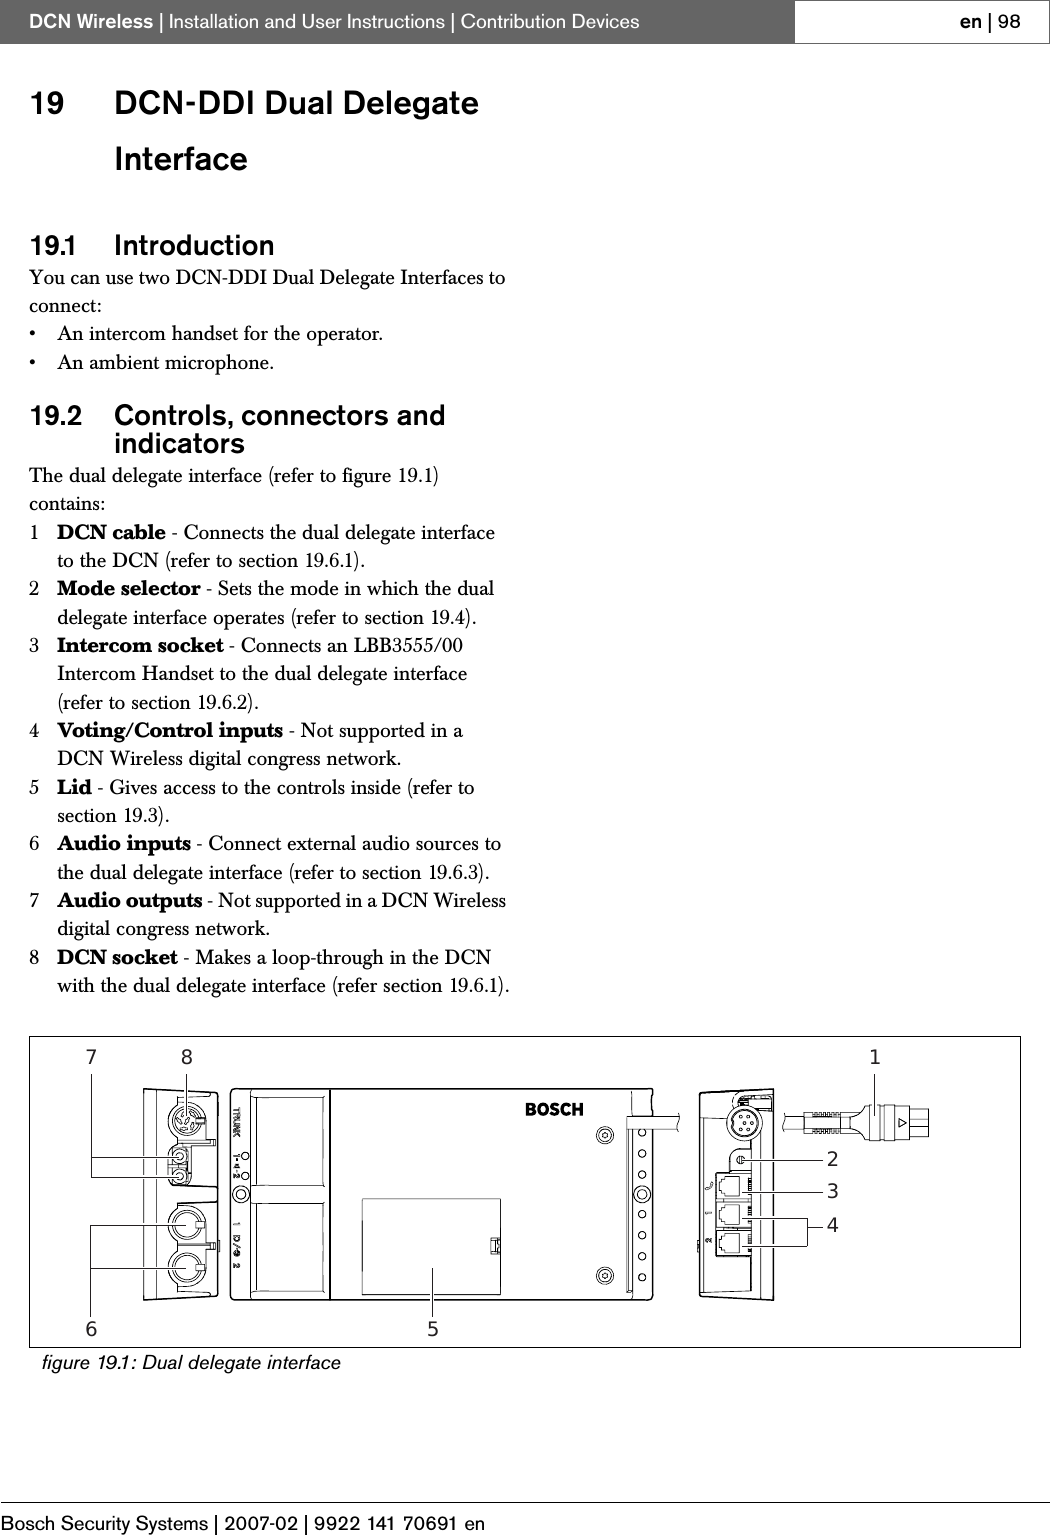 Page 69 of Bosch Security Systems DCNWAP Wireless Access Point User Manual Part 2